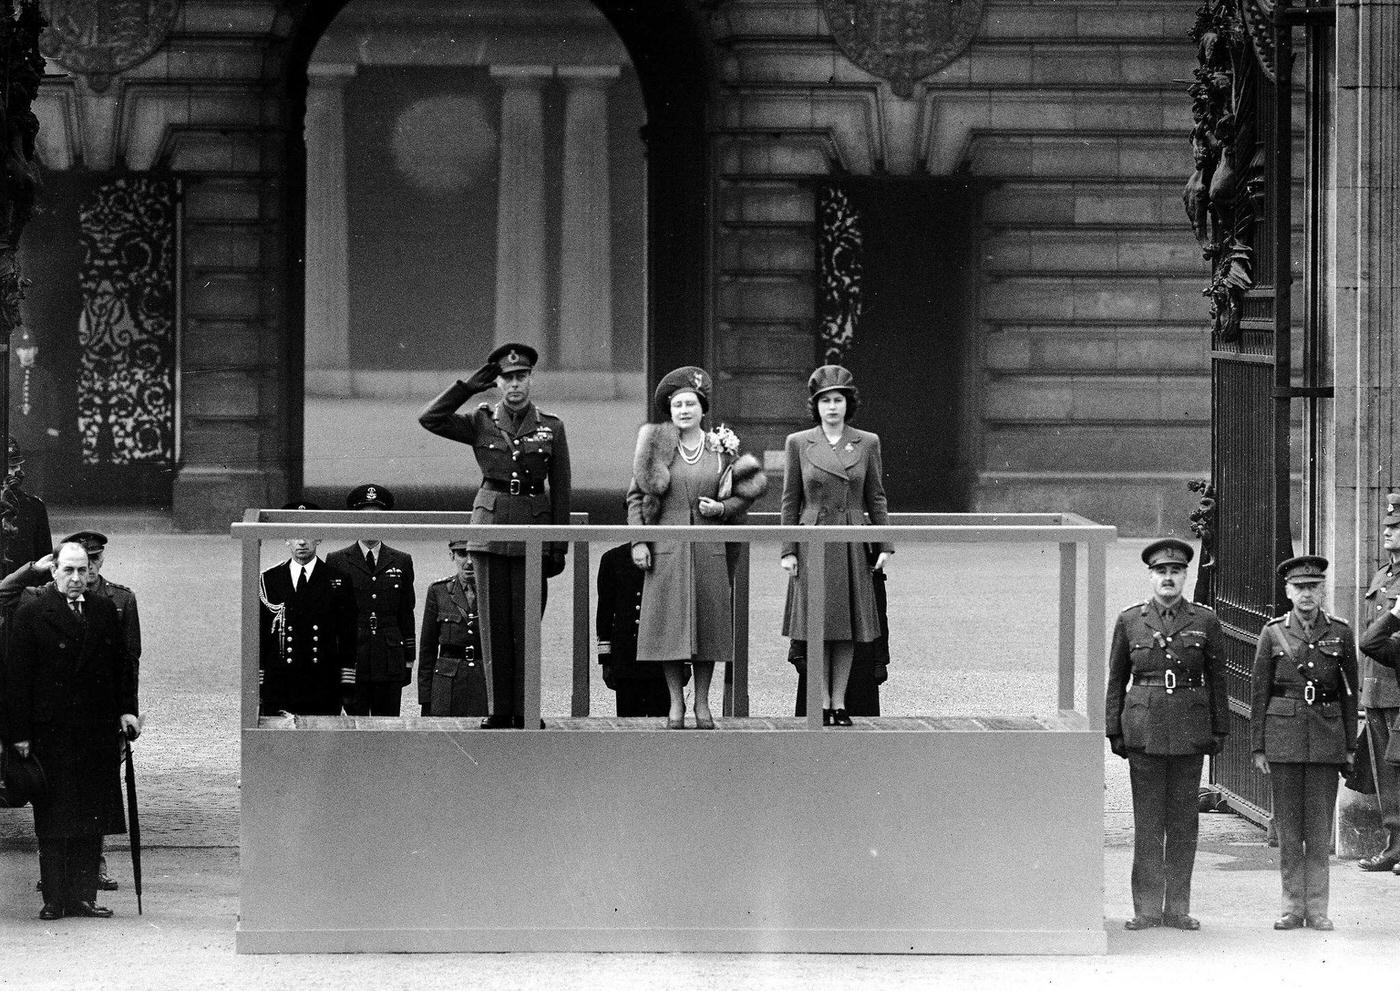 King George VI and Queen Elizabeth accompanied by Princess Elizabeth on the saluting base at Buckingham Palace, as the "Salute the Soldier" parade marches by.